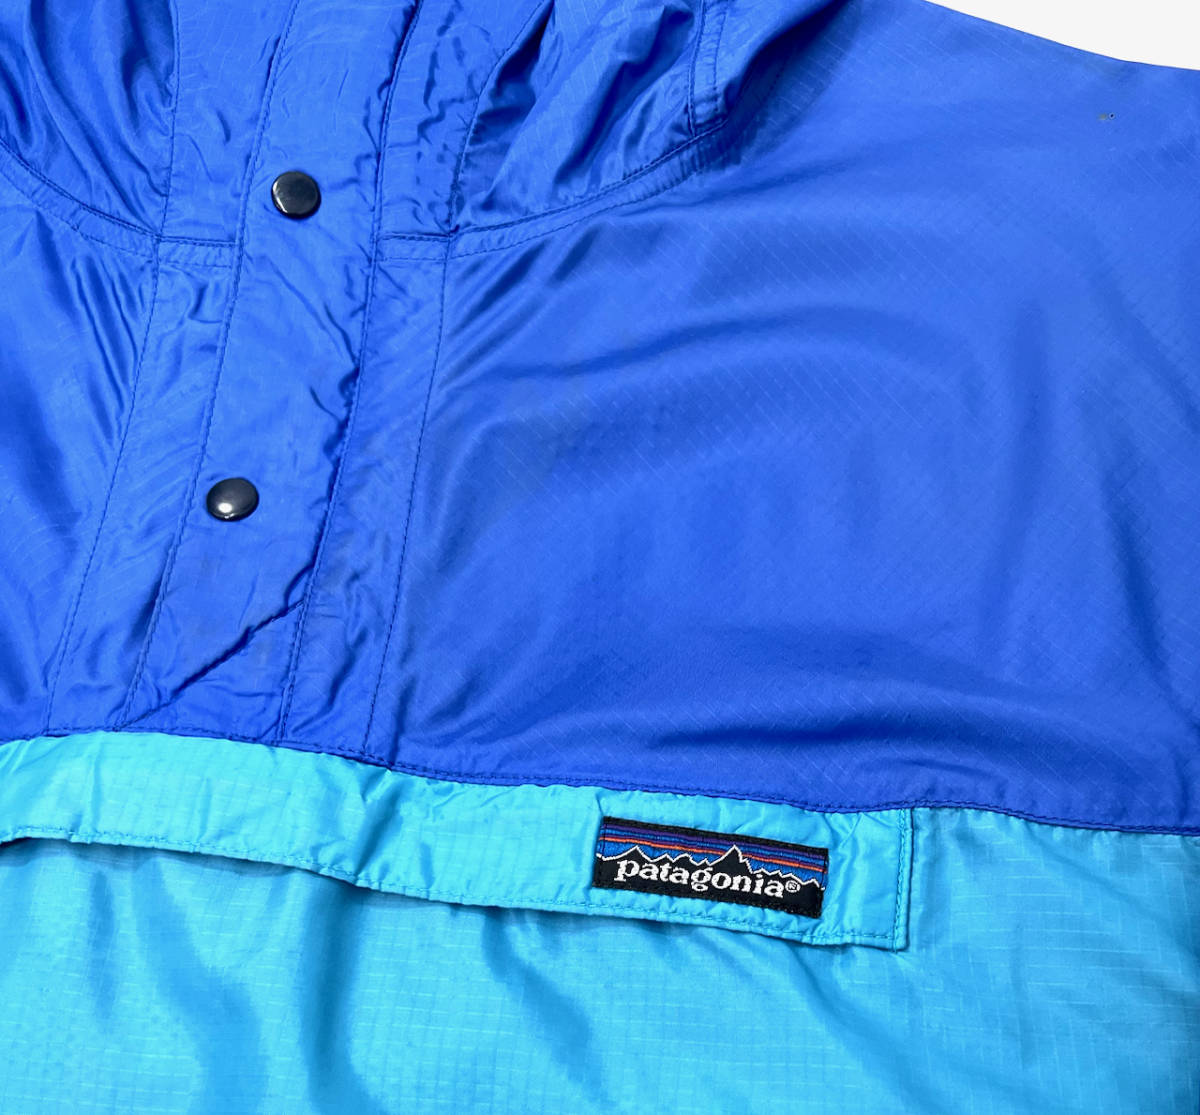 1980s PATAGONIA Feather Weight Shell Pullover L ヴィンテージパタゴニア フェザーウェイトシェルプルオーバー ナイロンジャケット_画像5